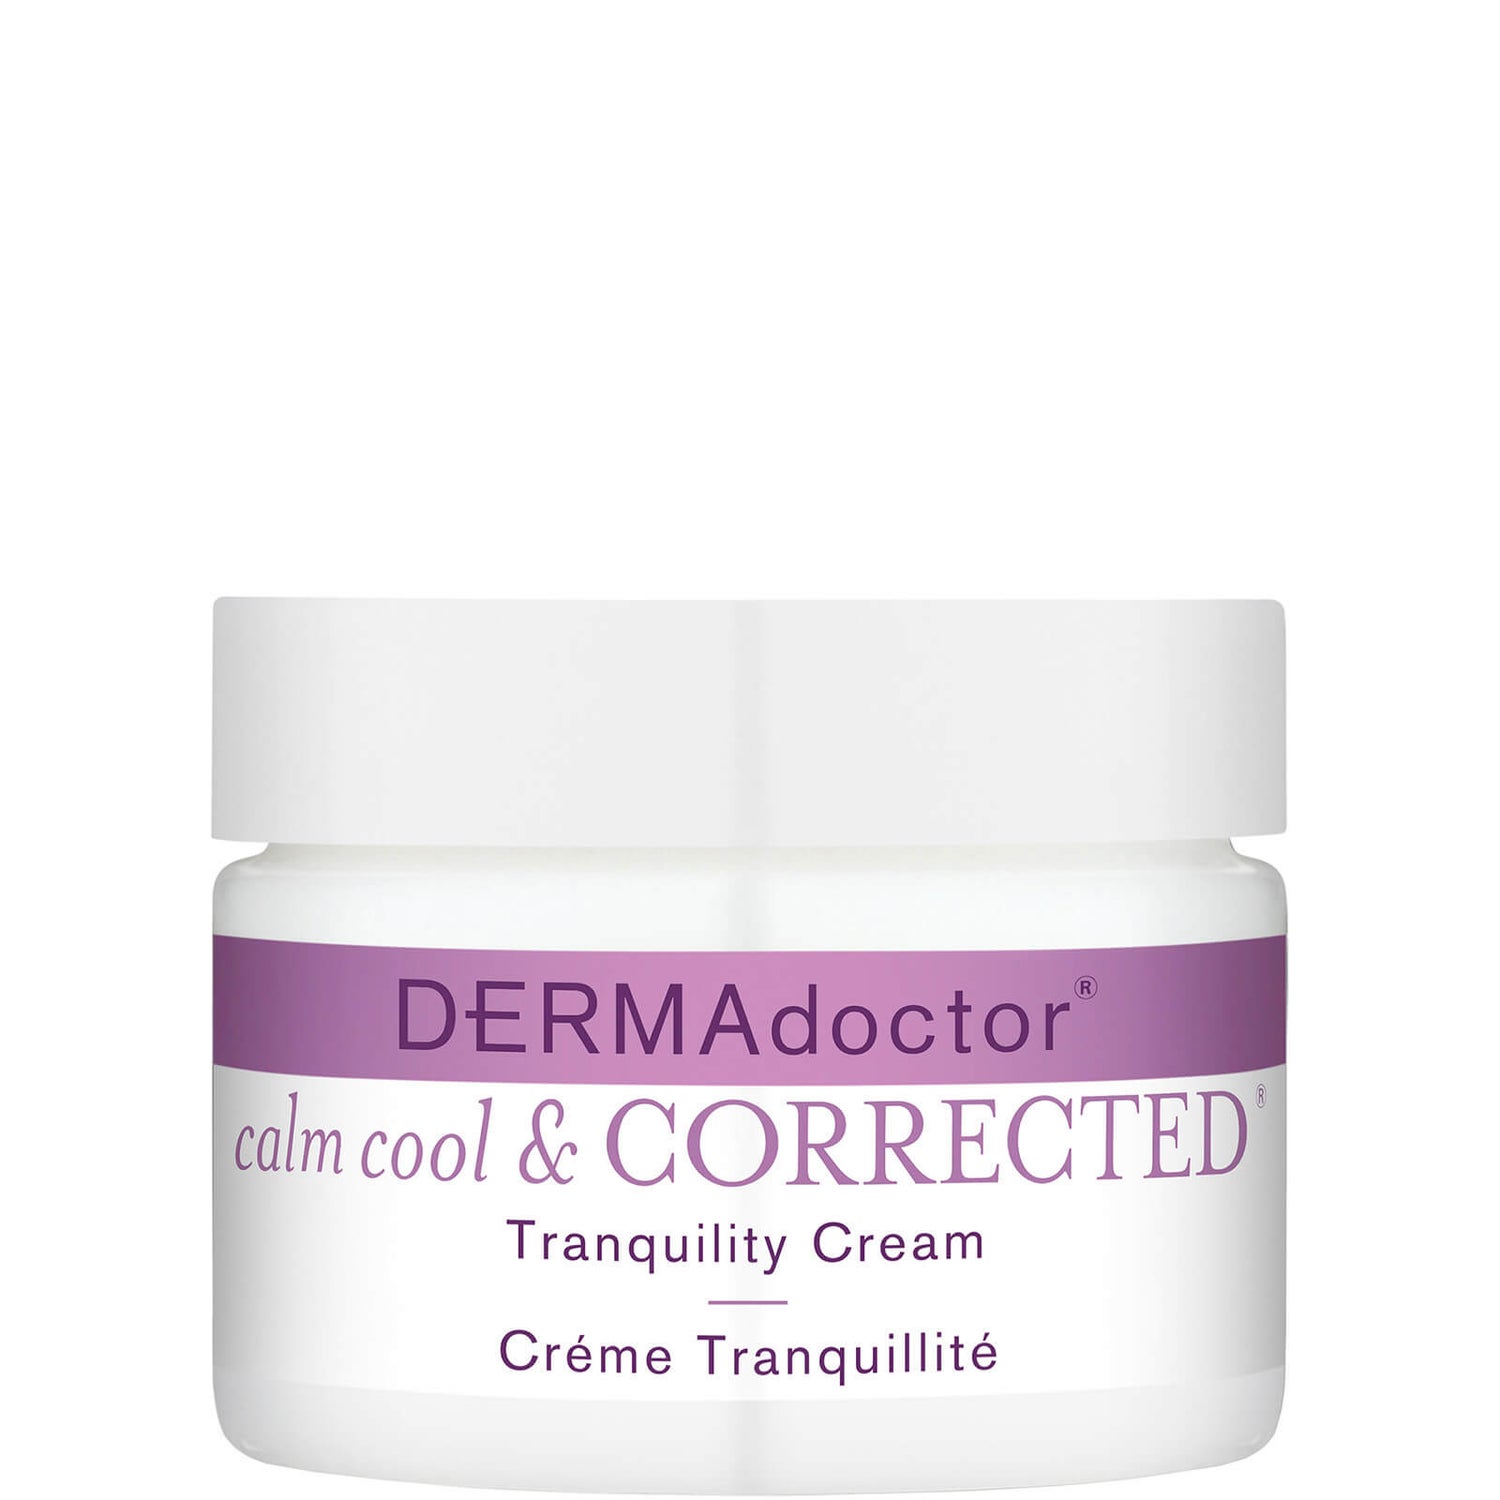 DERMAdoctor Calm Cool & Corrected Tranquility Cream